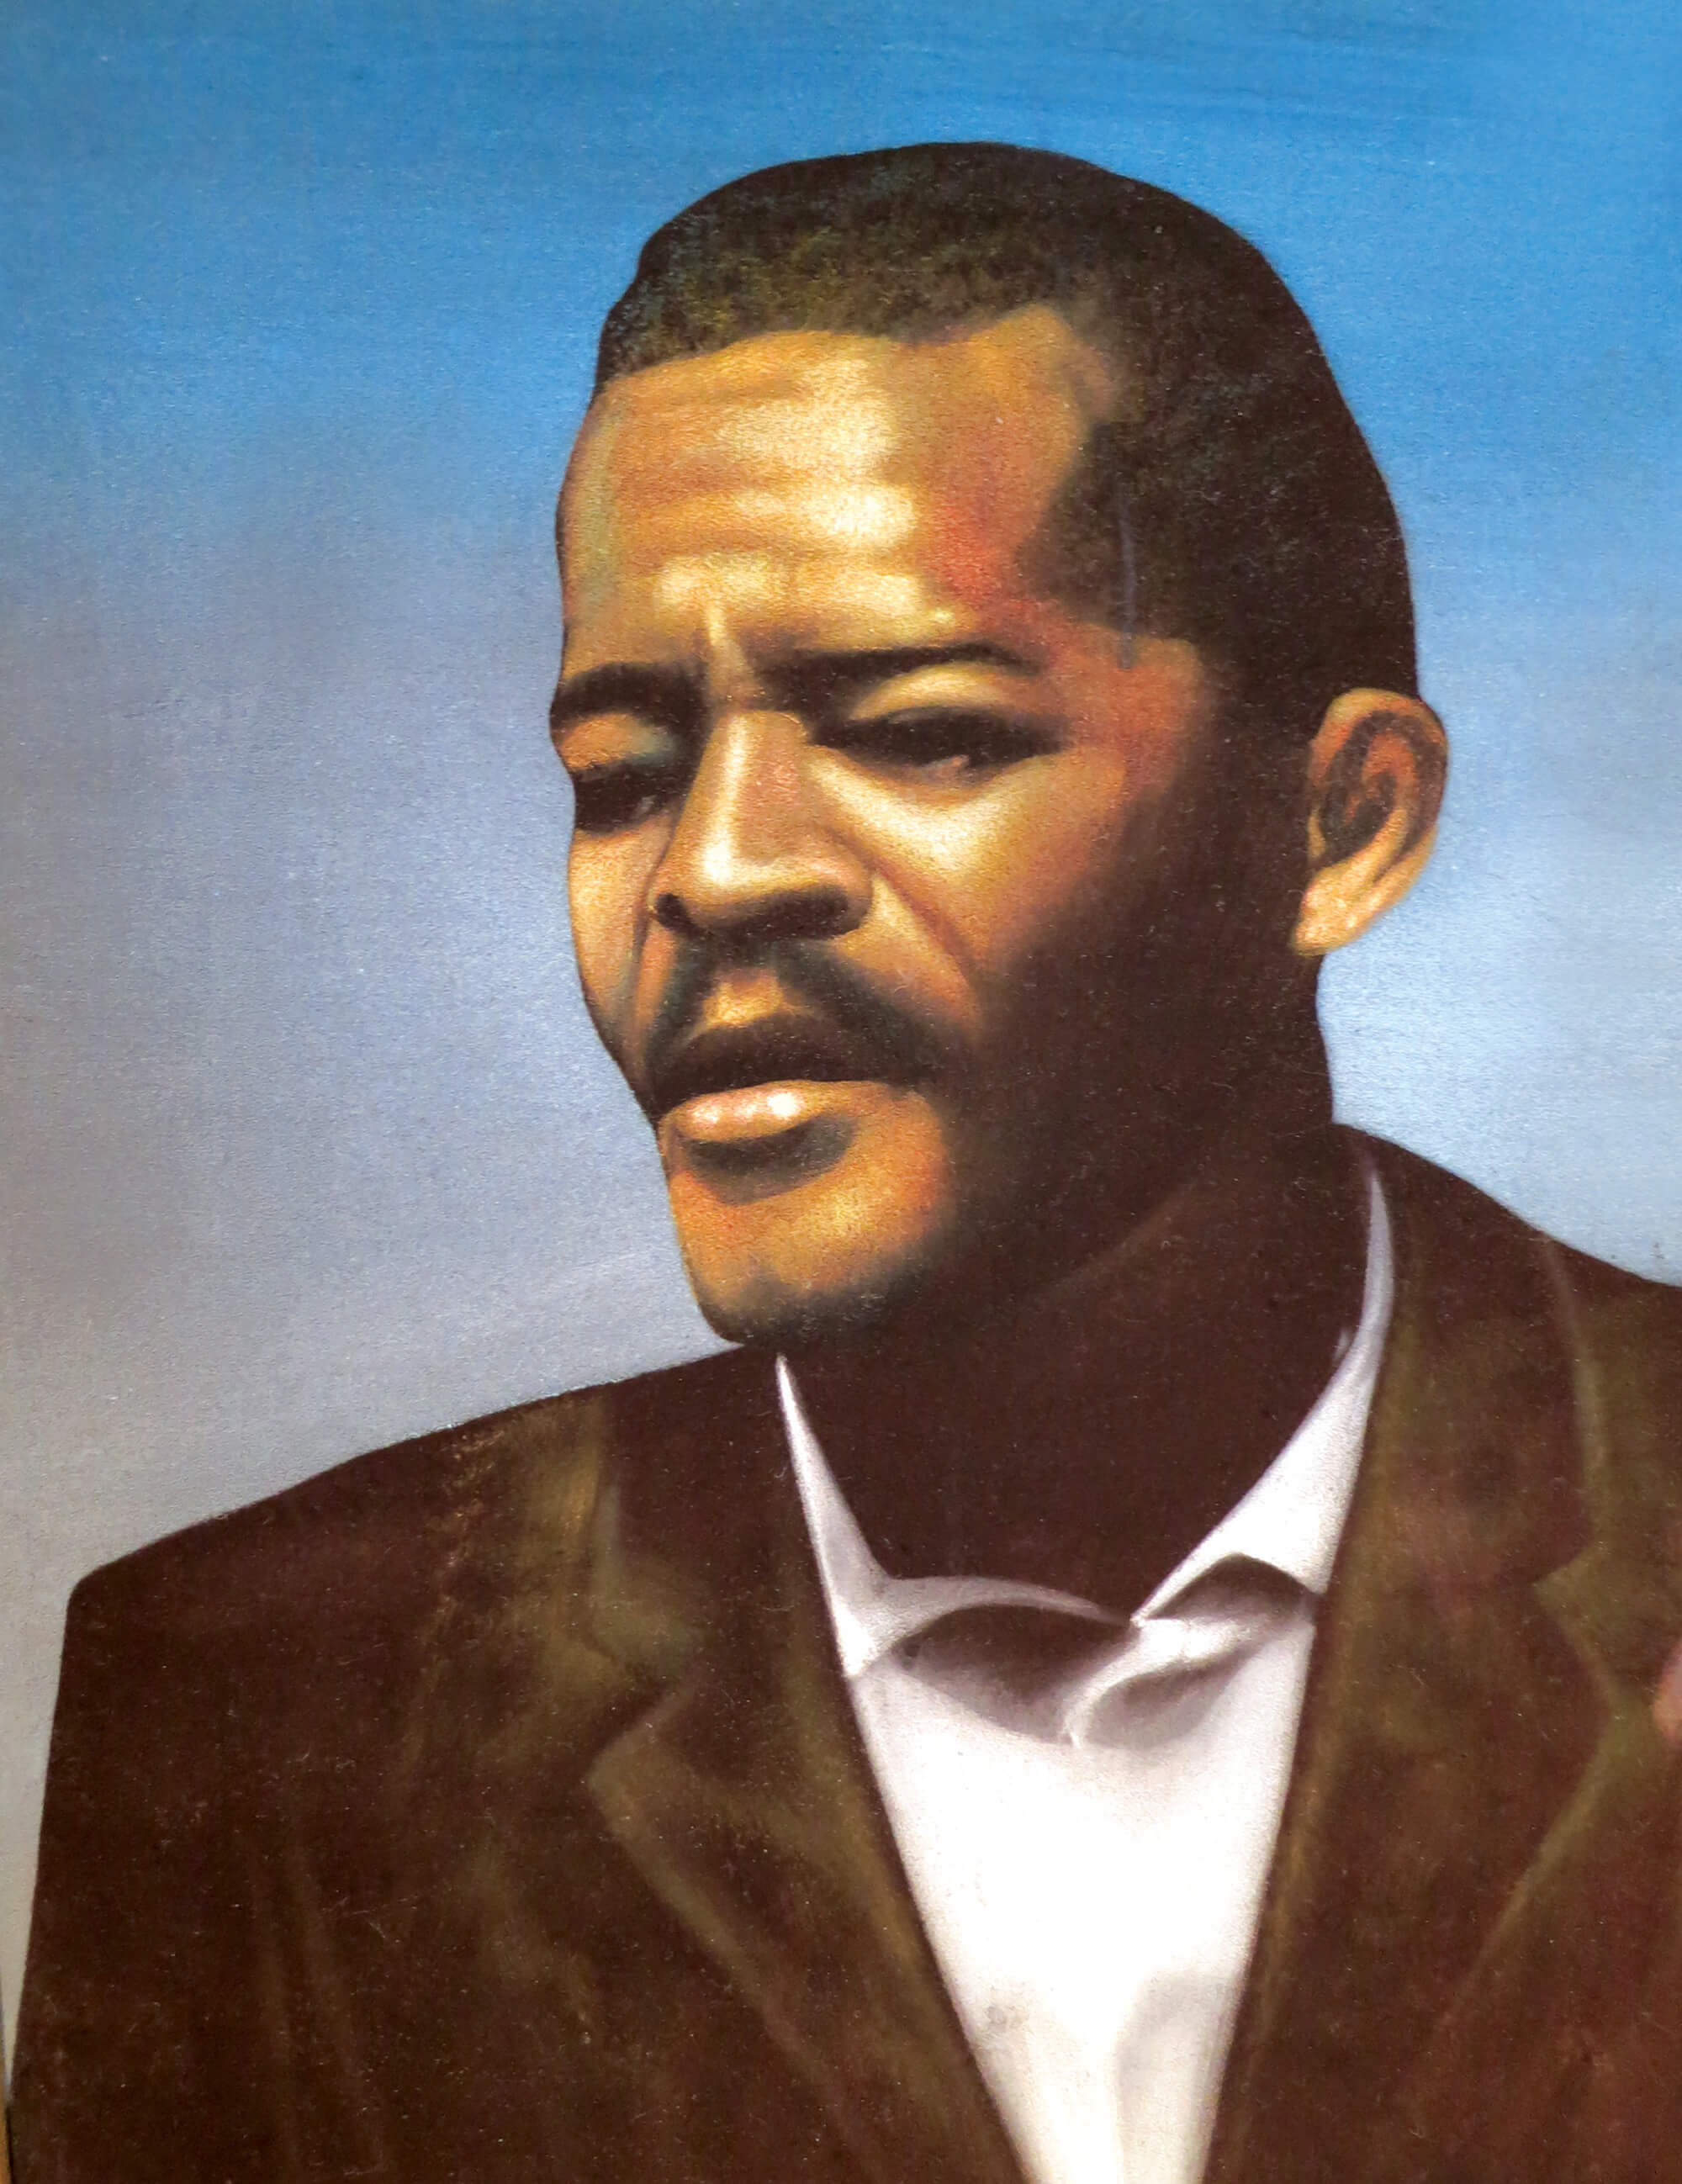 A portrait of Clarence Thirteen X, which hangs in the Allah School, located in Harlem.